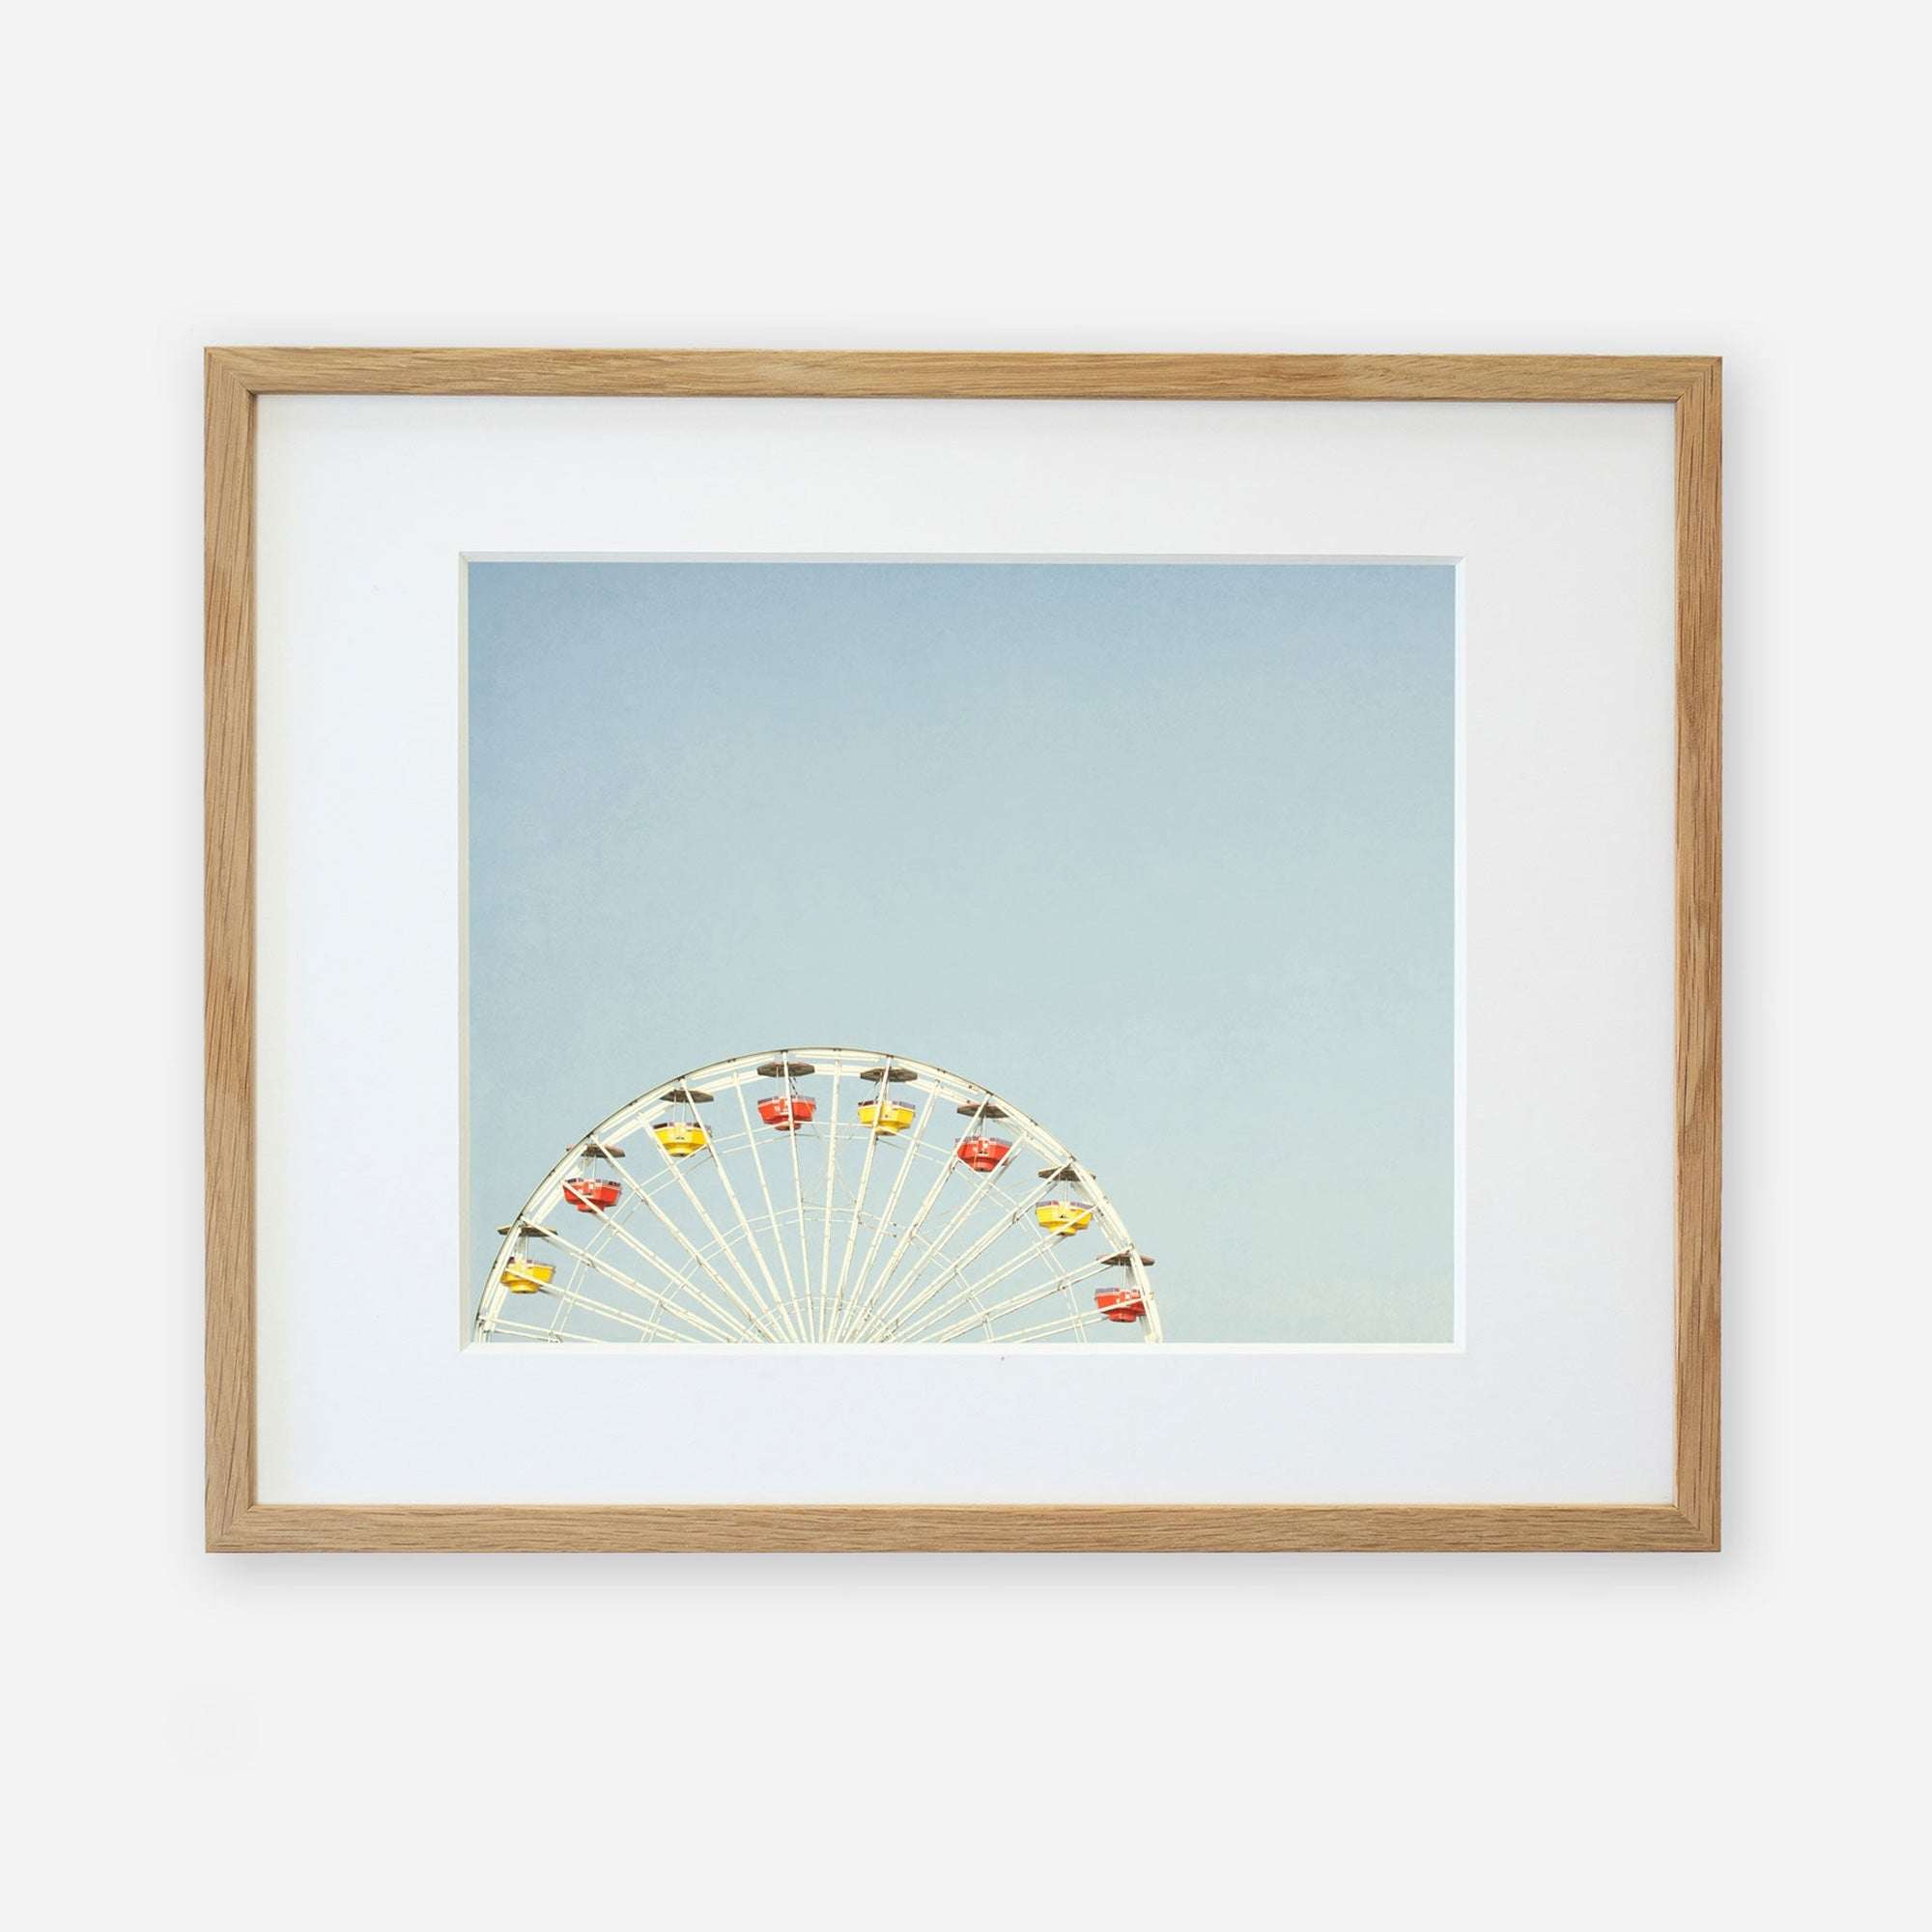 A framed photograph of Ferris Blue, the Santa Monica Pier ferris wheel, partially visible at the bottom, against a light blue sky, displayed in a simple wooden frame with a white mat by Offley Green.